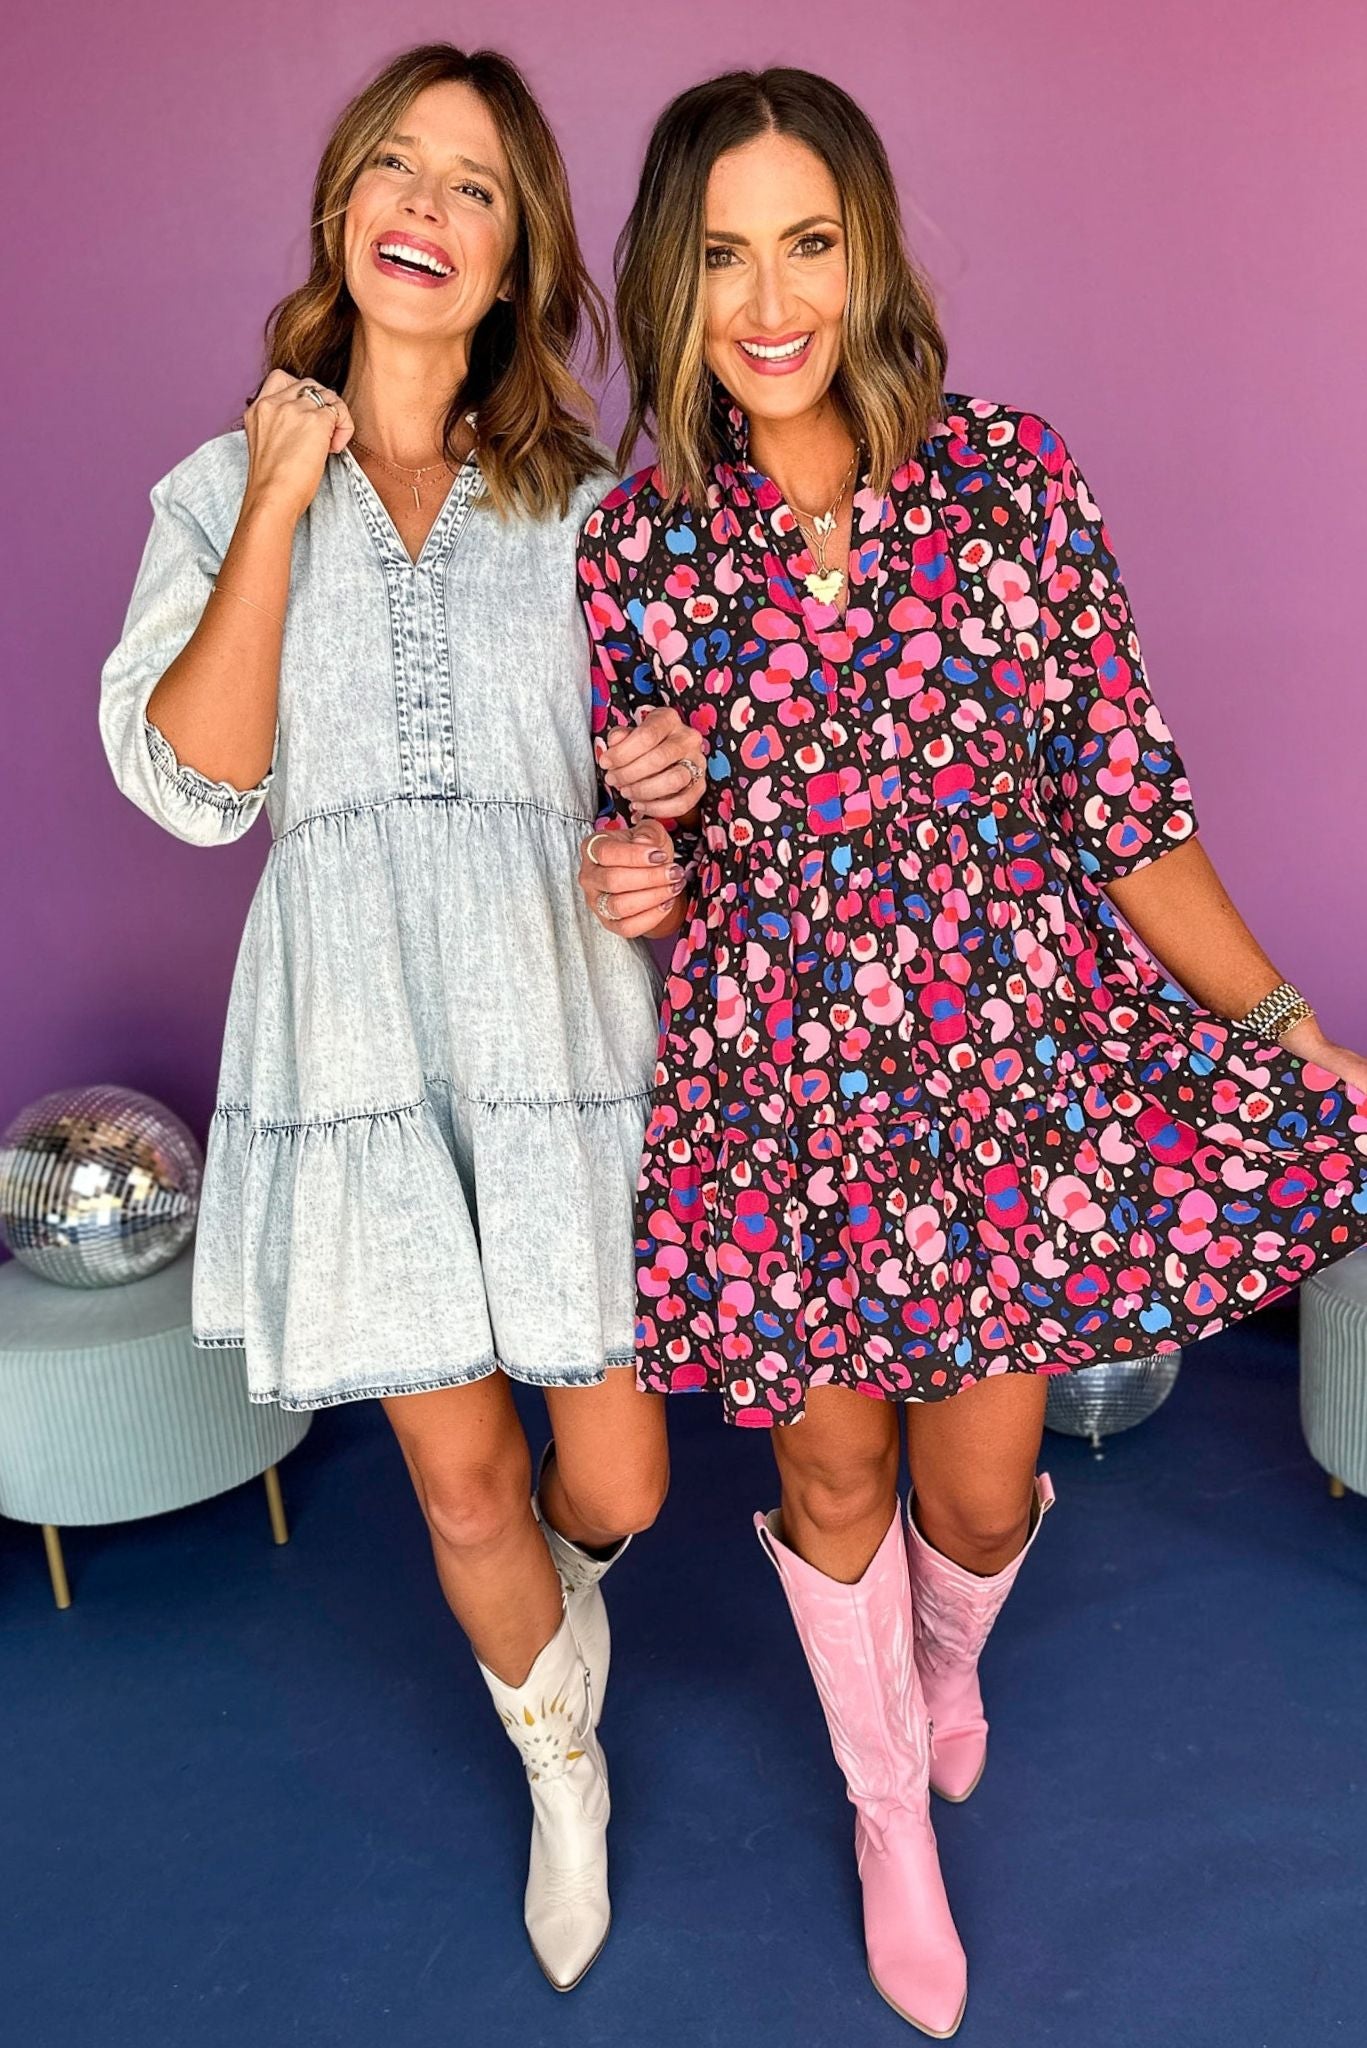 SSYS The Chloe Dress, SSYS the label, ssys dress, must have dress, must have print, must have style, elevated style, elevated dress, mom style, shop style your senses by mallory fitzsimmons